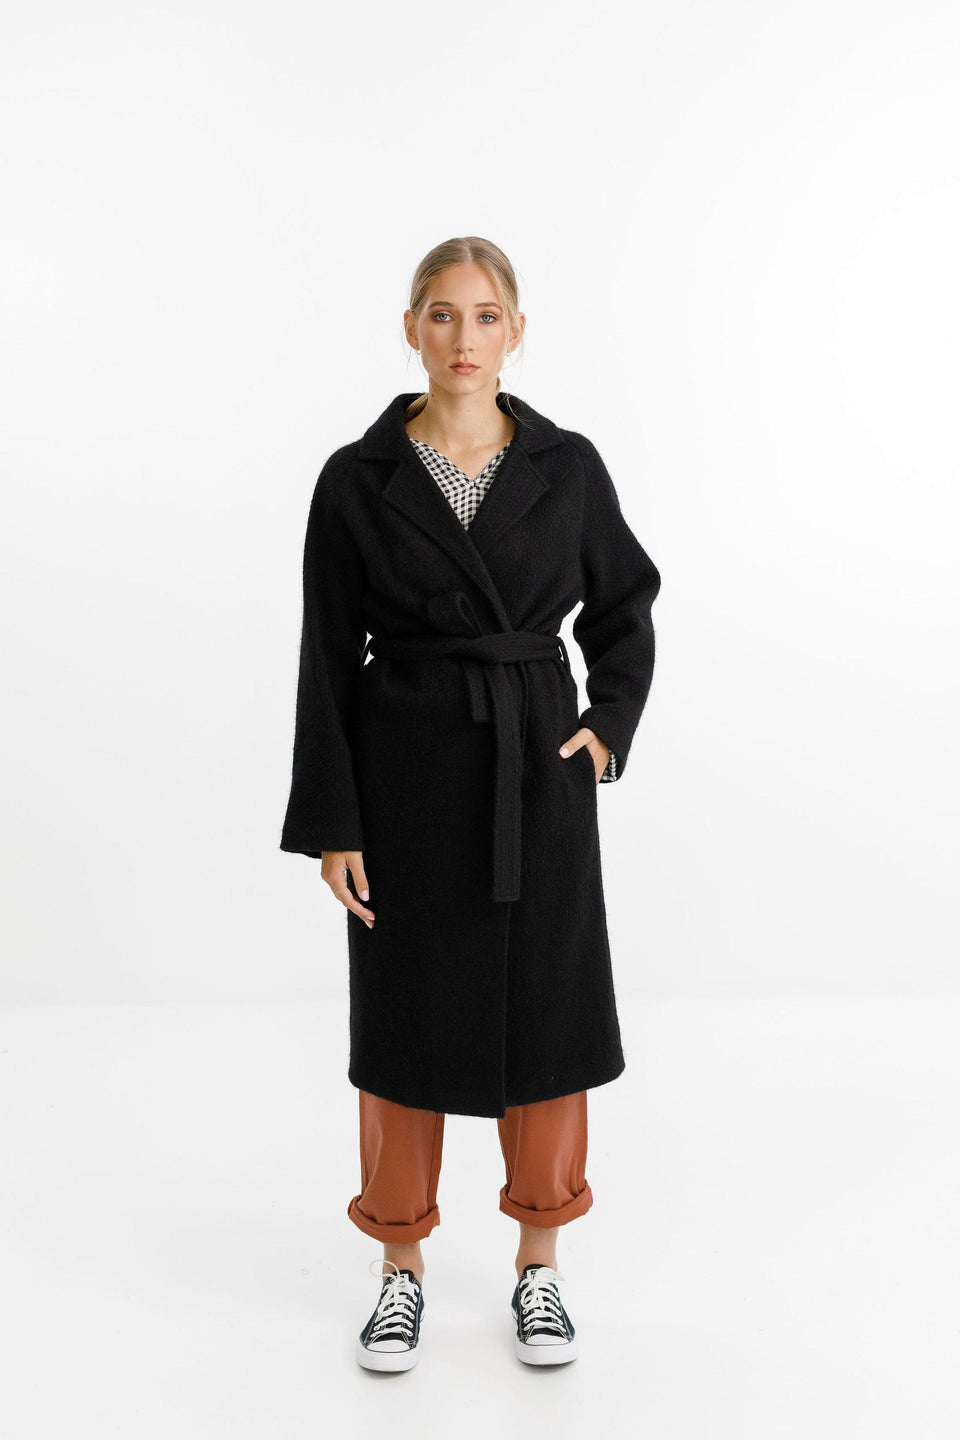 Thing Thing Clement Coat Black